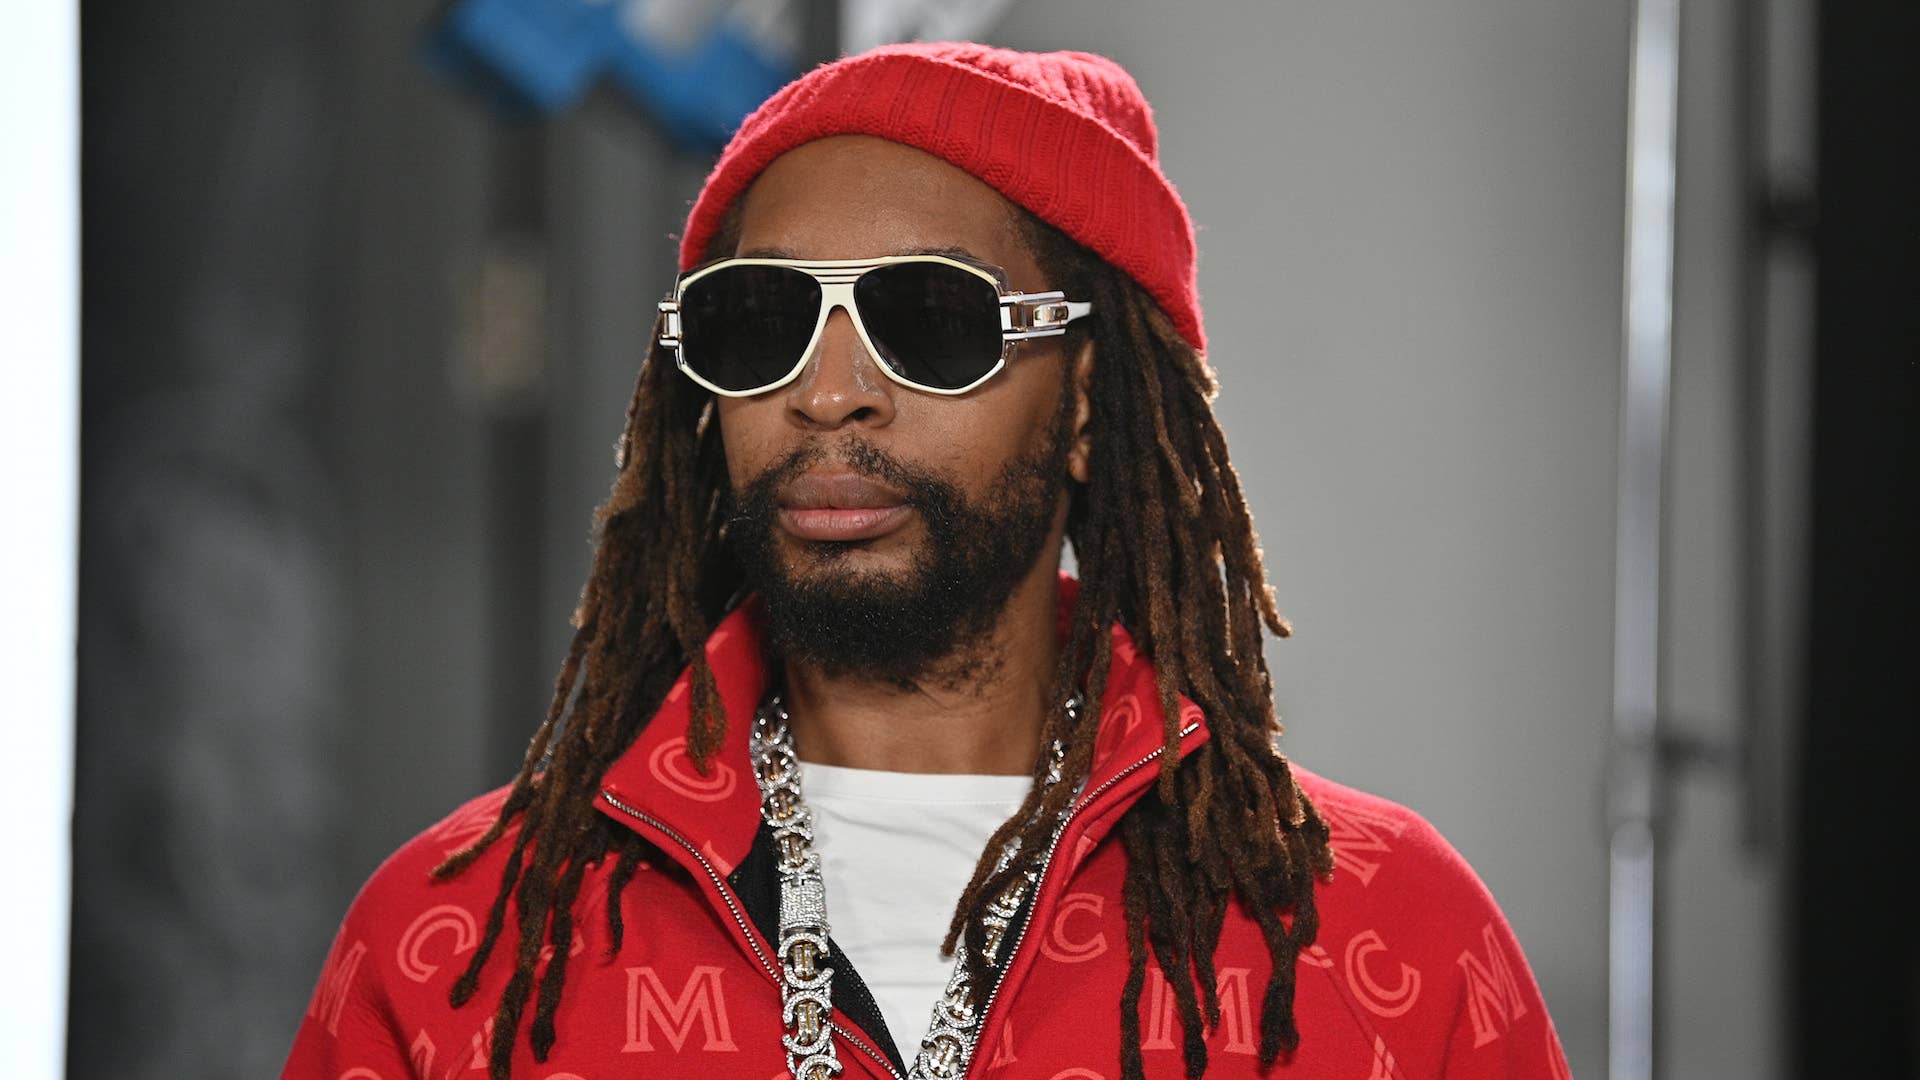 Lil Jon Sounds Off on Republican Politician Using His Lyrics to Troll  Opponents